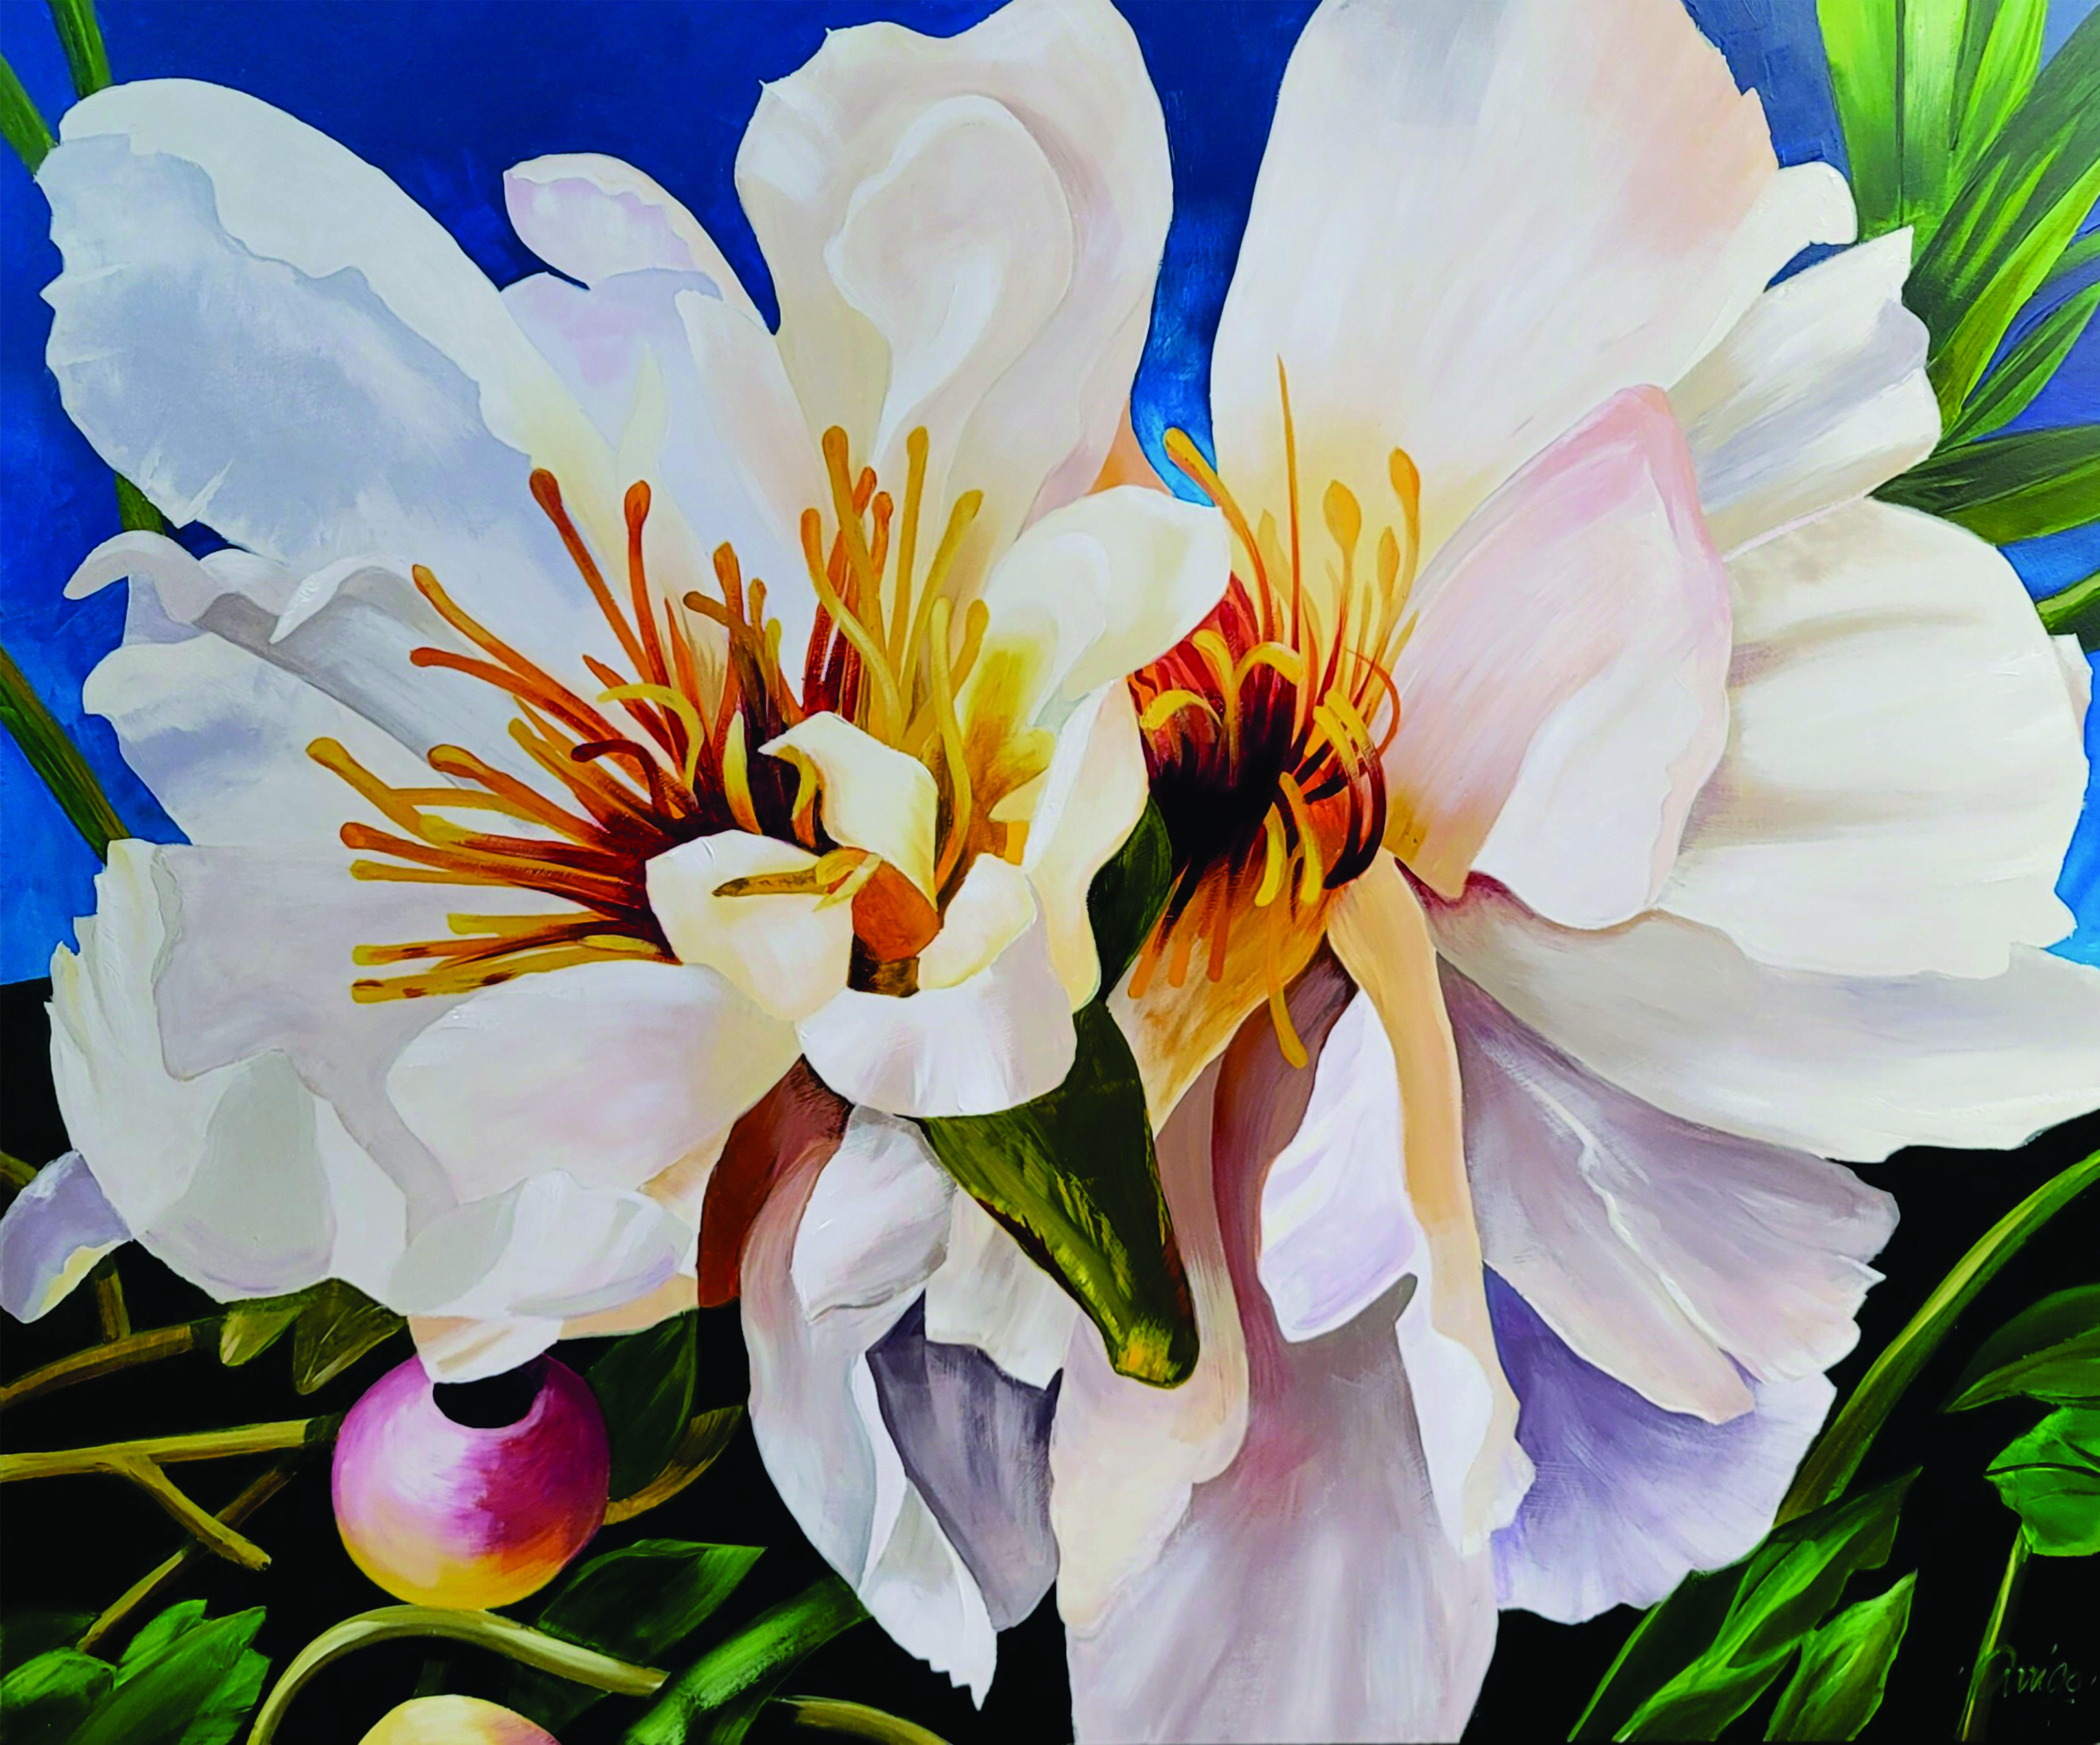 This is a creamy white paonia (peaony) flower in full bloom. These flowers are simply magnificent. They just seem to demand the attention of passersby. I could not resist the challenge of capturing on canvas this beauty from my garden. Though the